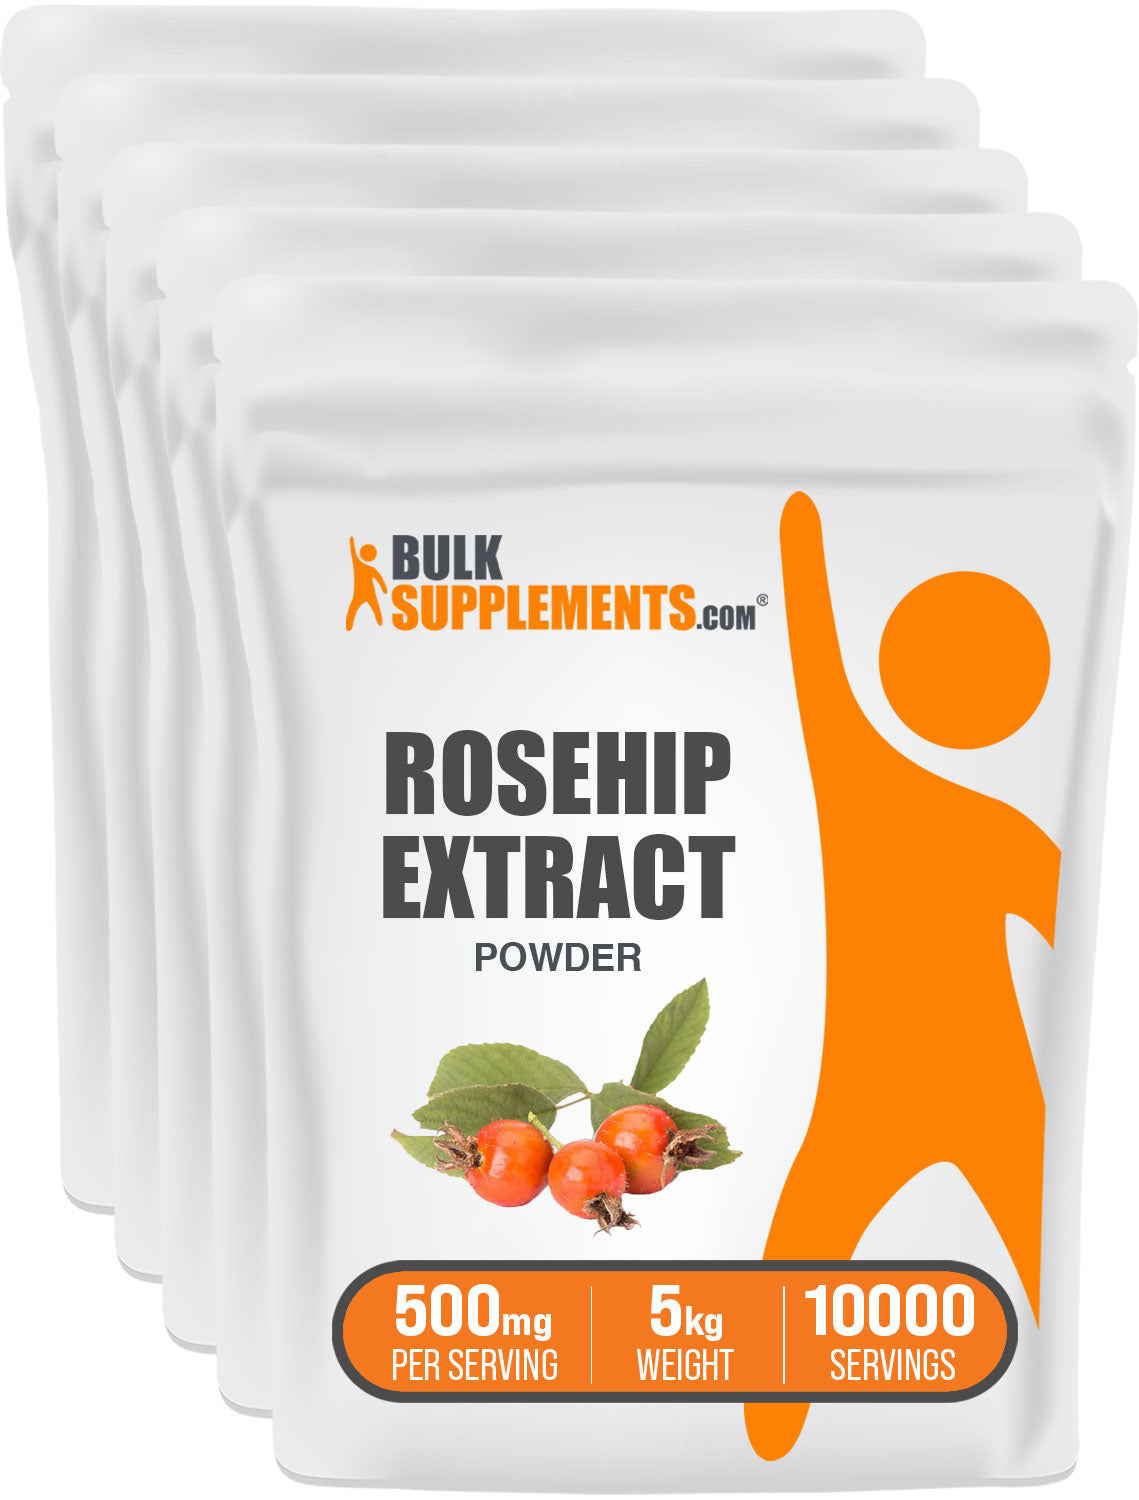 Rosehip Extract 5kg Bag